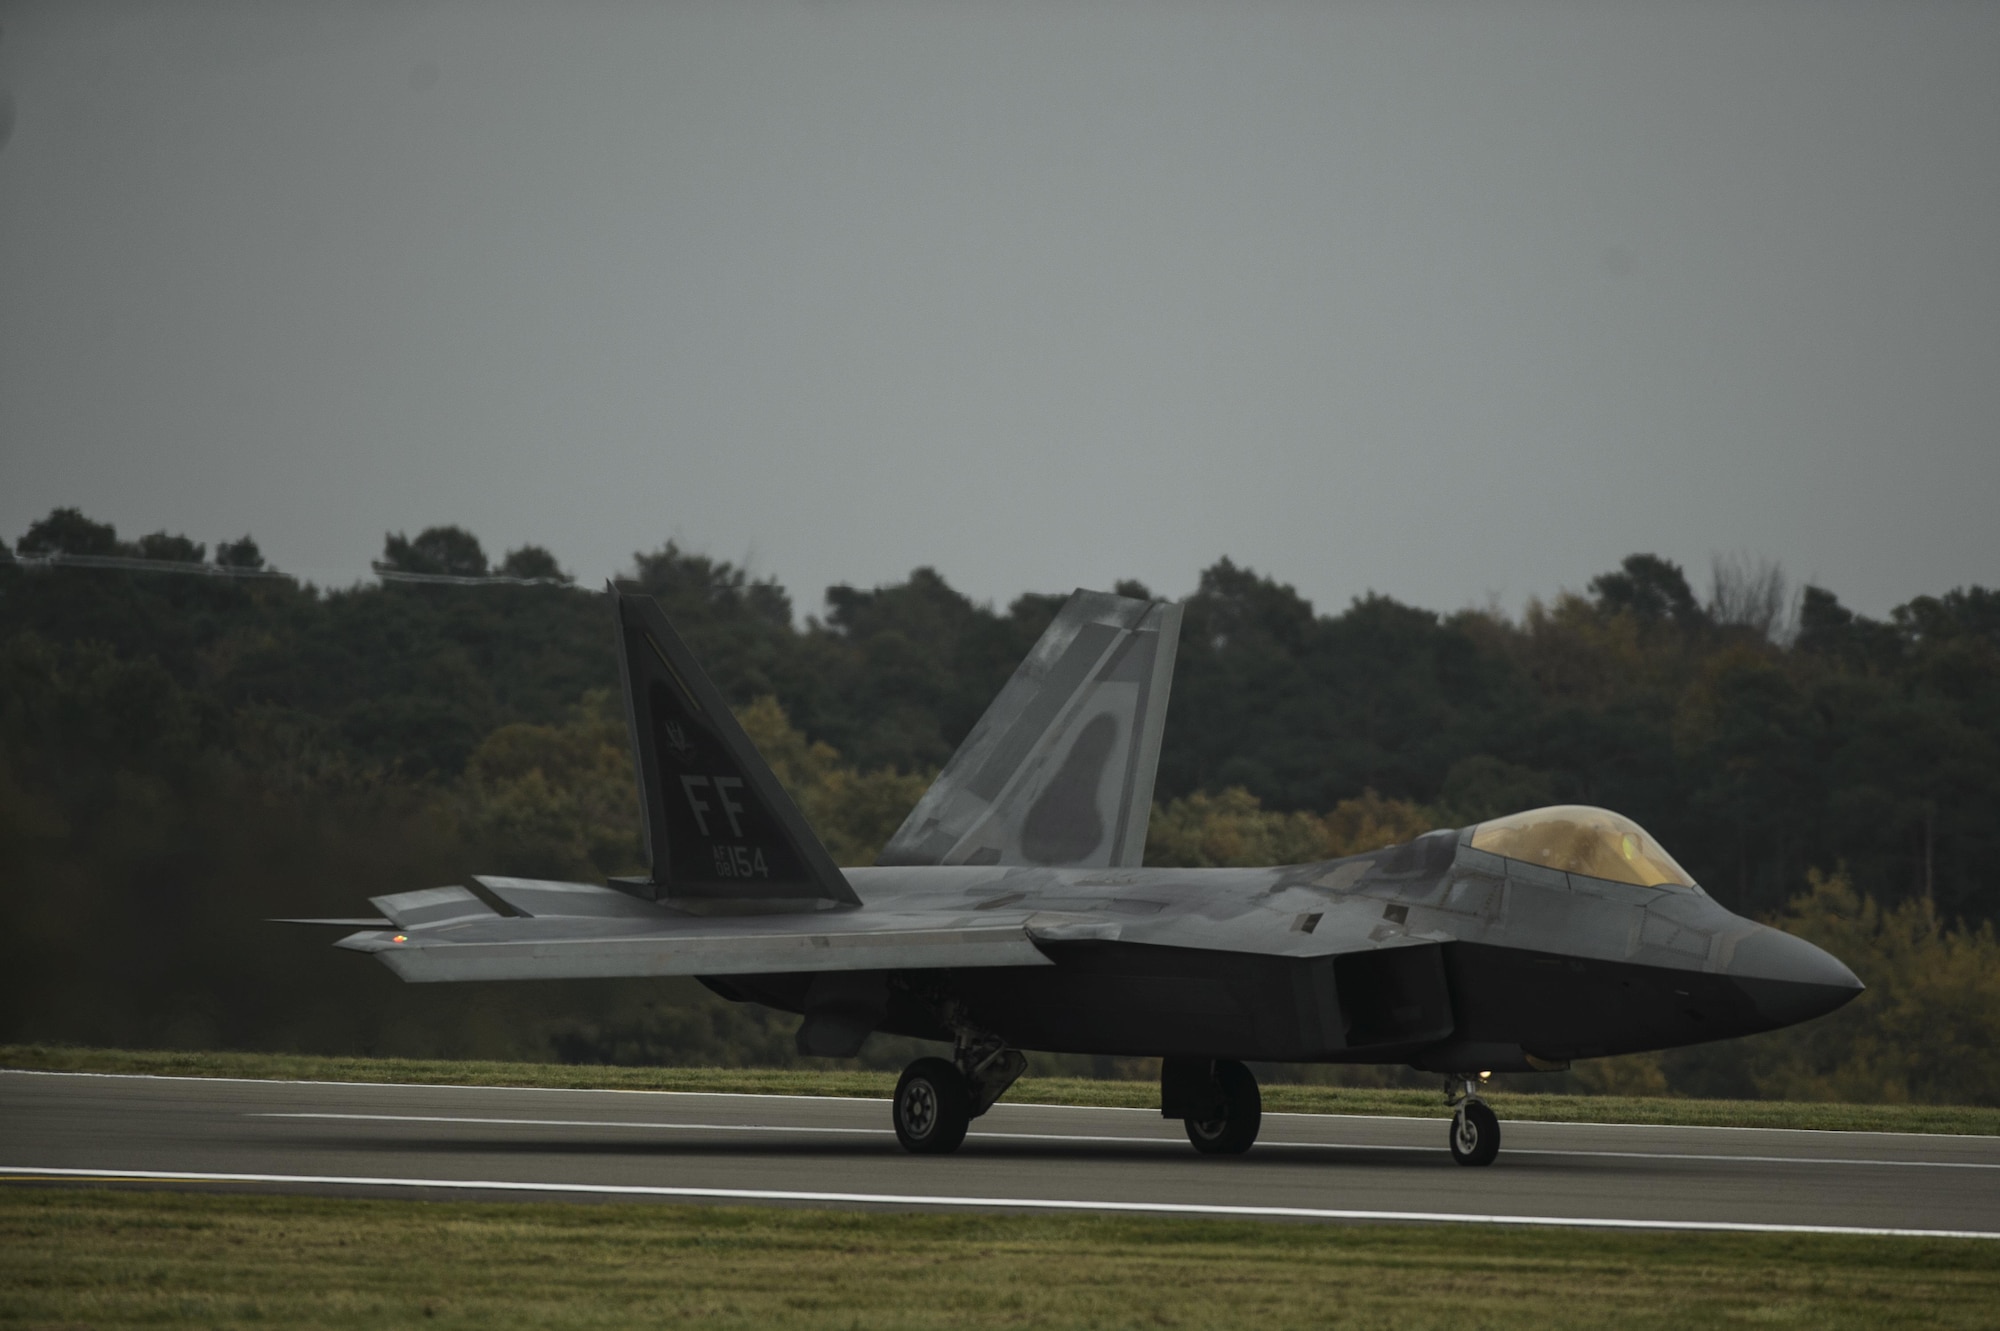 An F-22 Raptor assigned to the 1st Fighter Wing, Joint Base Langley-Eustis, Va., lands at Spangdahlem Air Base, Germany, Oct. 13, 2017.